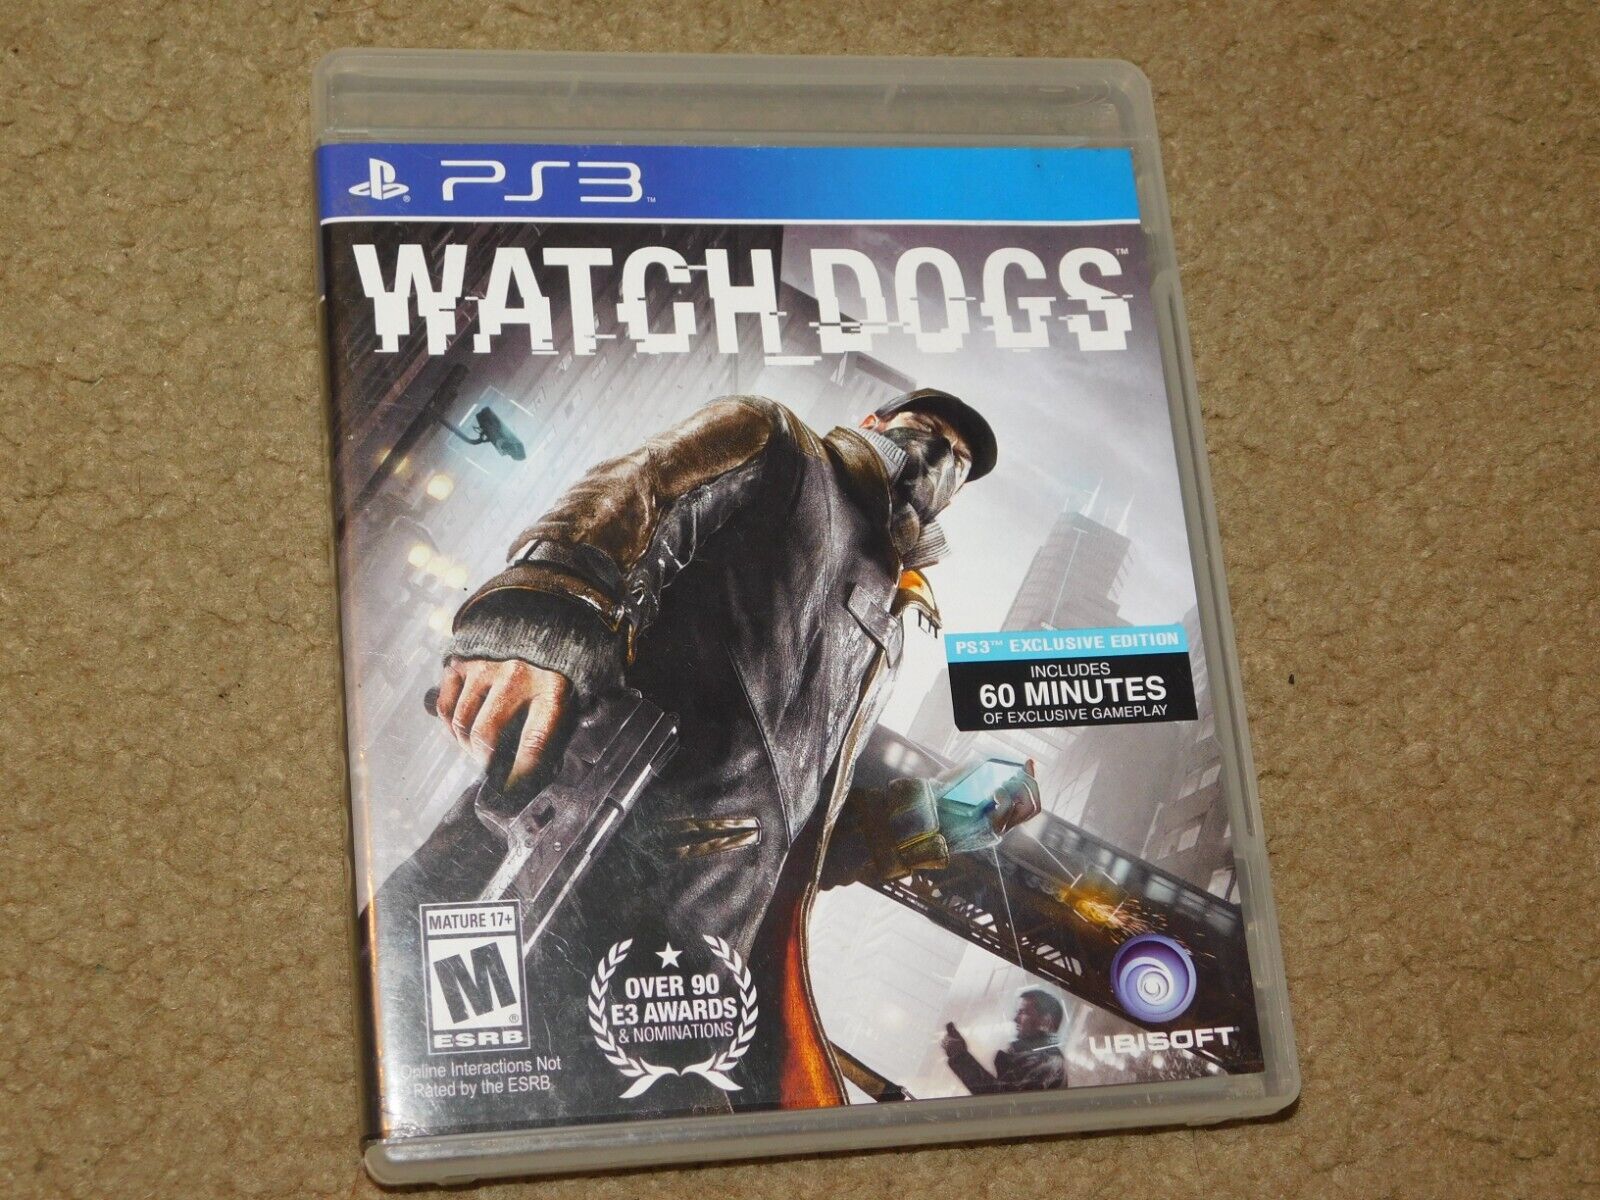 Scheur Voorkomen Vlekkeloos Watch Dogs - ANZ Special Edition - (PS3) Playstation 3 (Manual Included) |  eBay